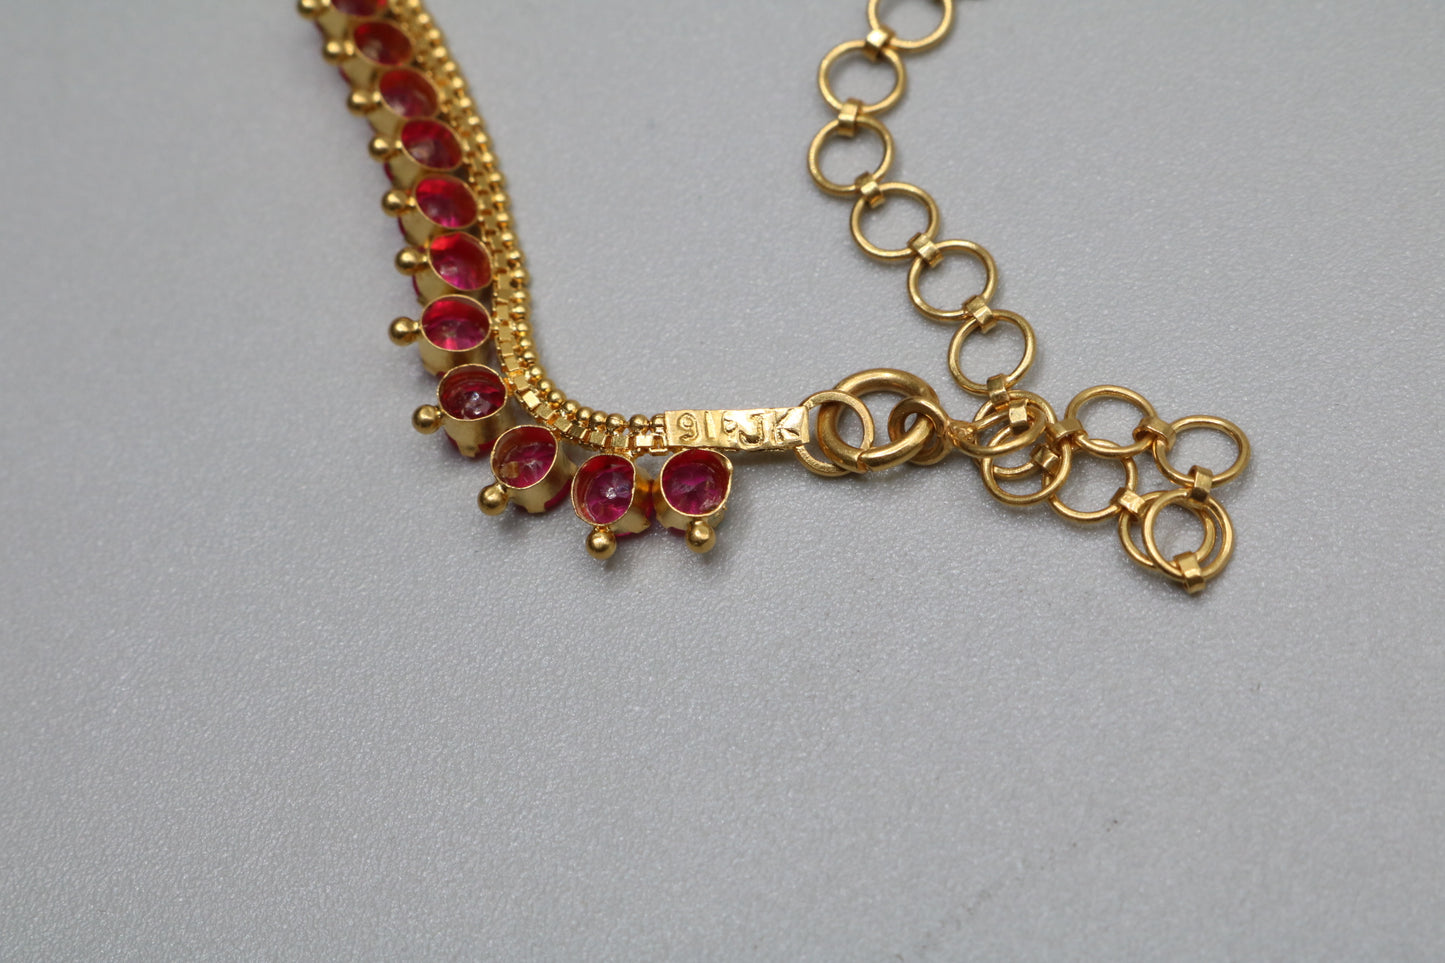 22K Yellow Gold Fancy Tennis Necklace (16.5 inches) (Local pick-up only)